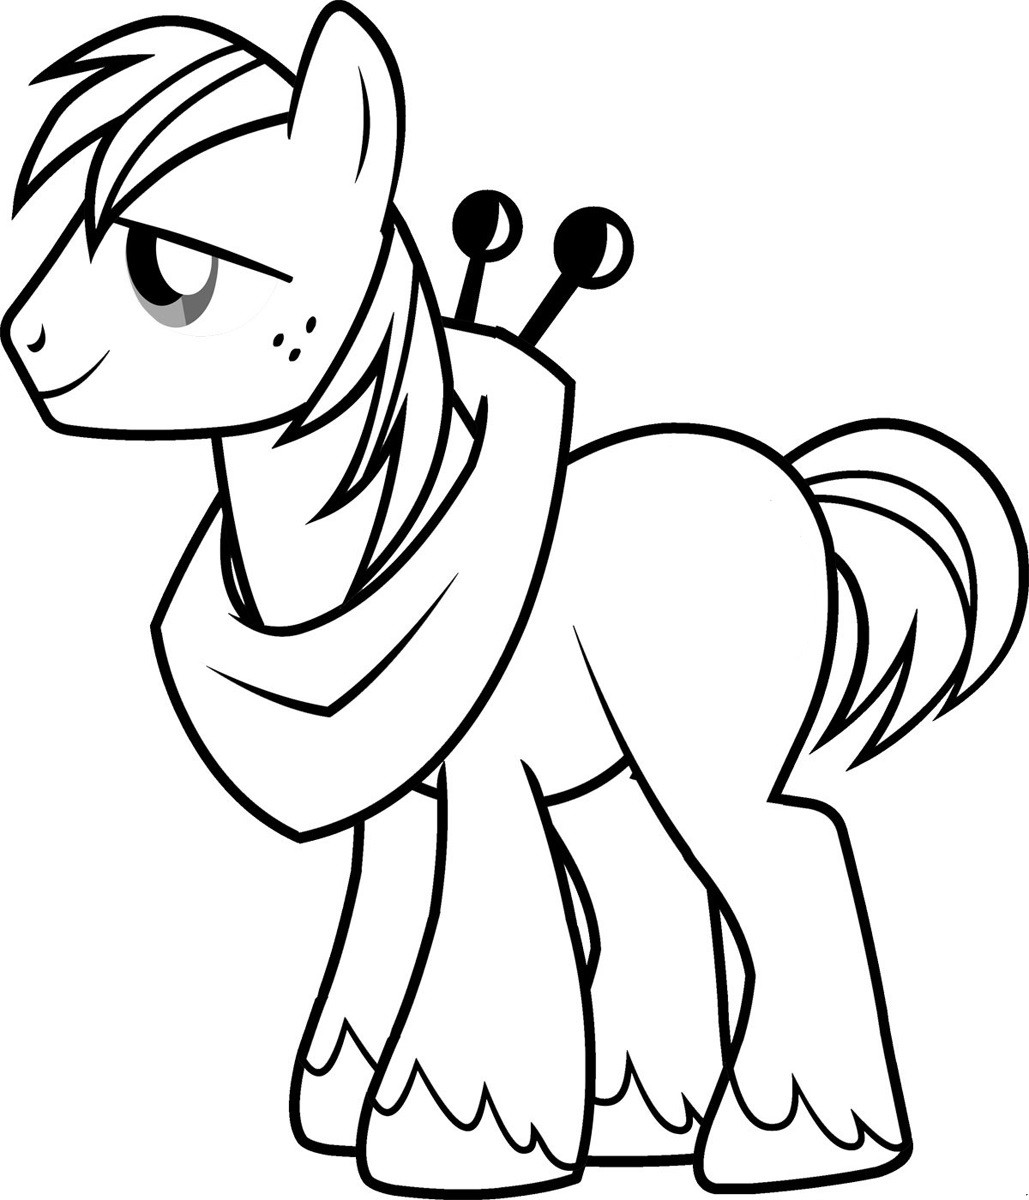 Freee Printable Coloring Pages
 Ponies from Ponyville coloring pages free printable